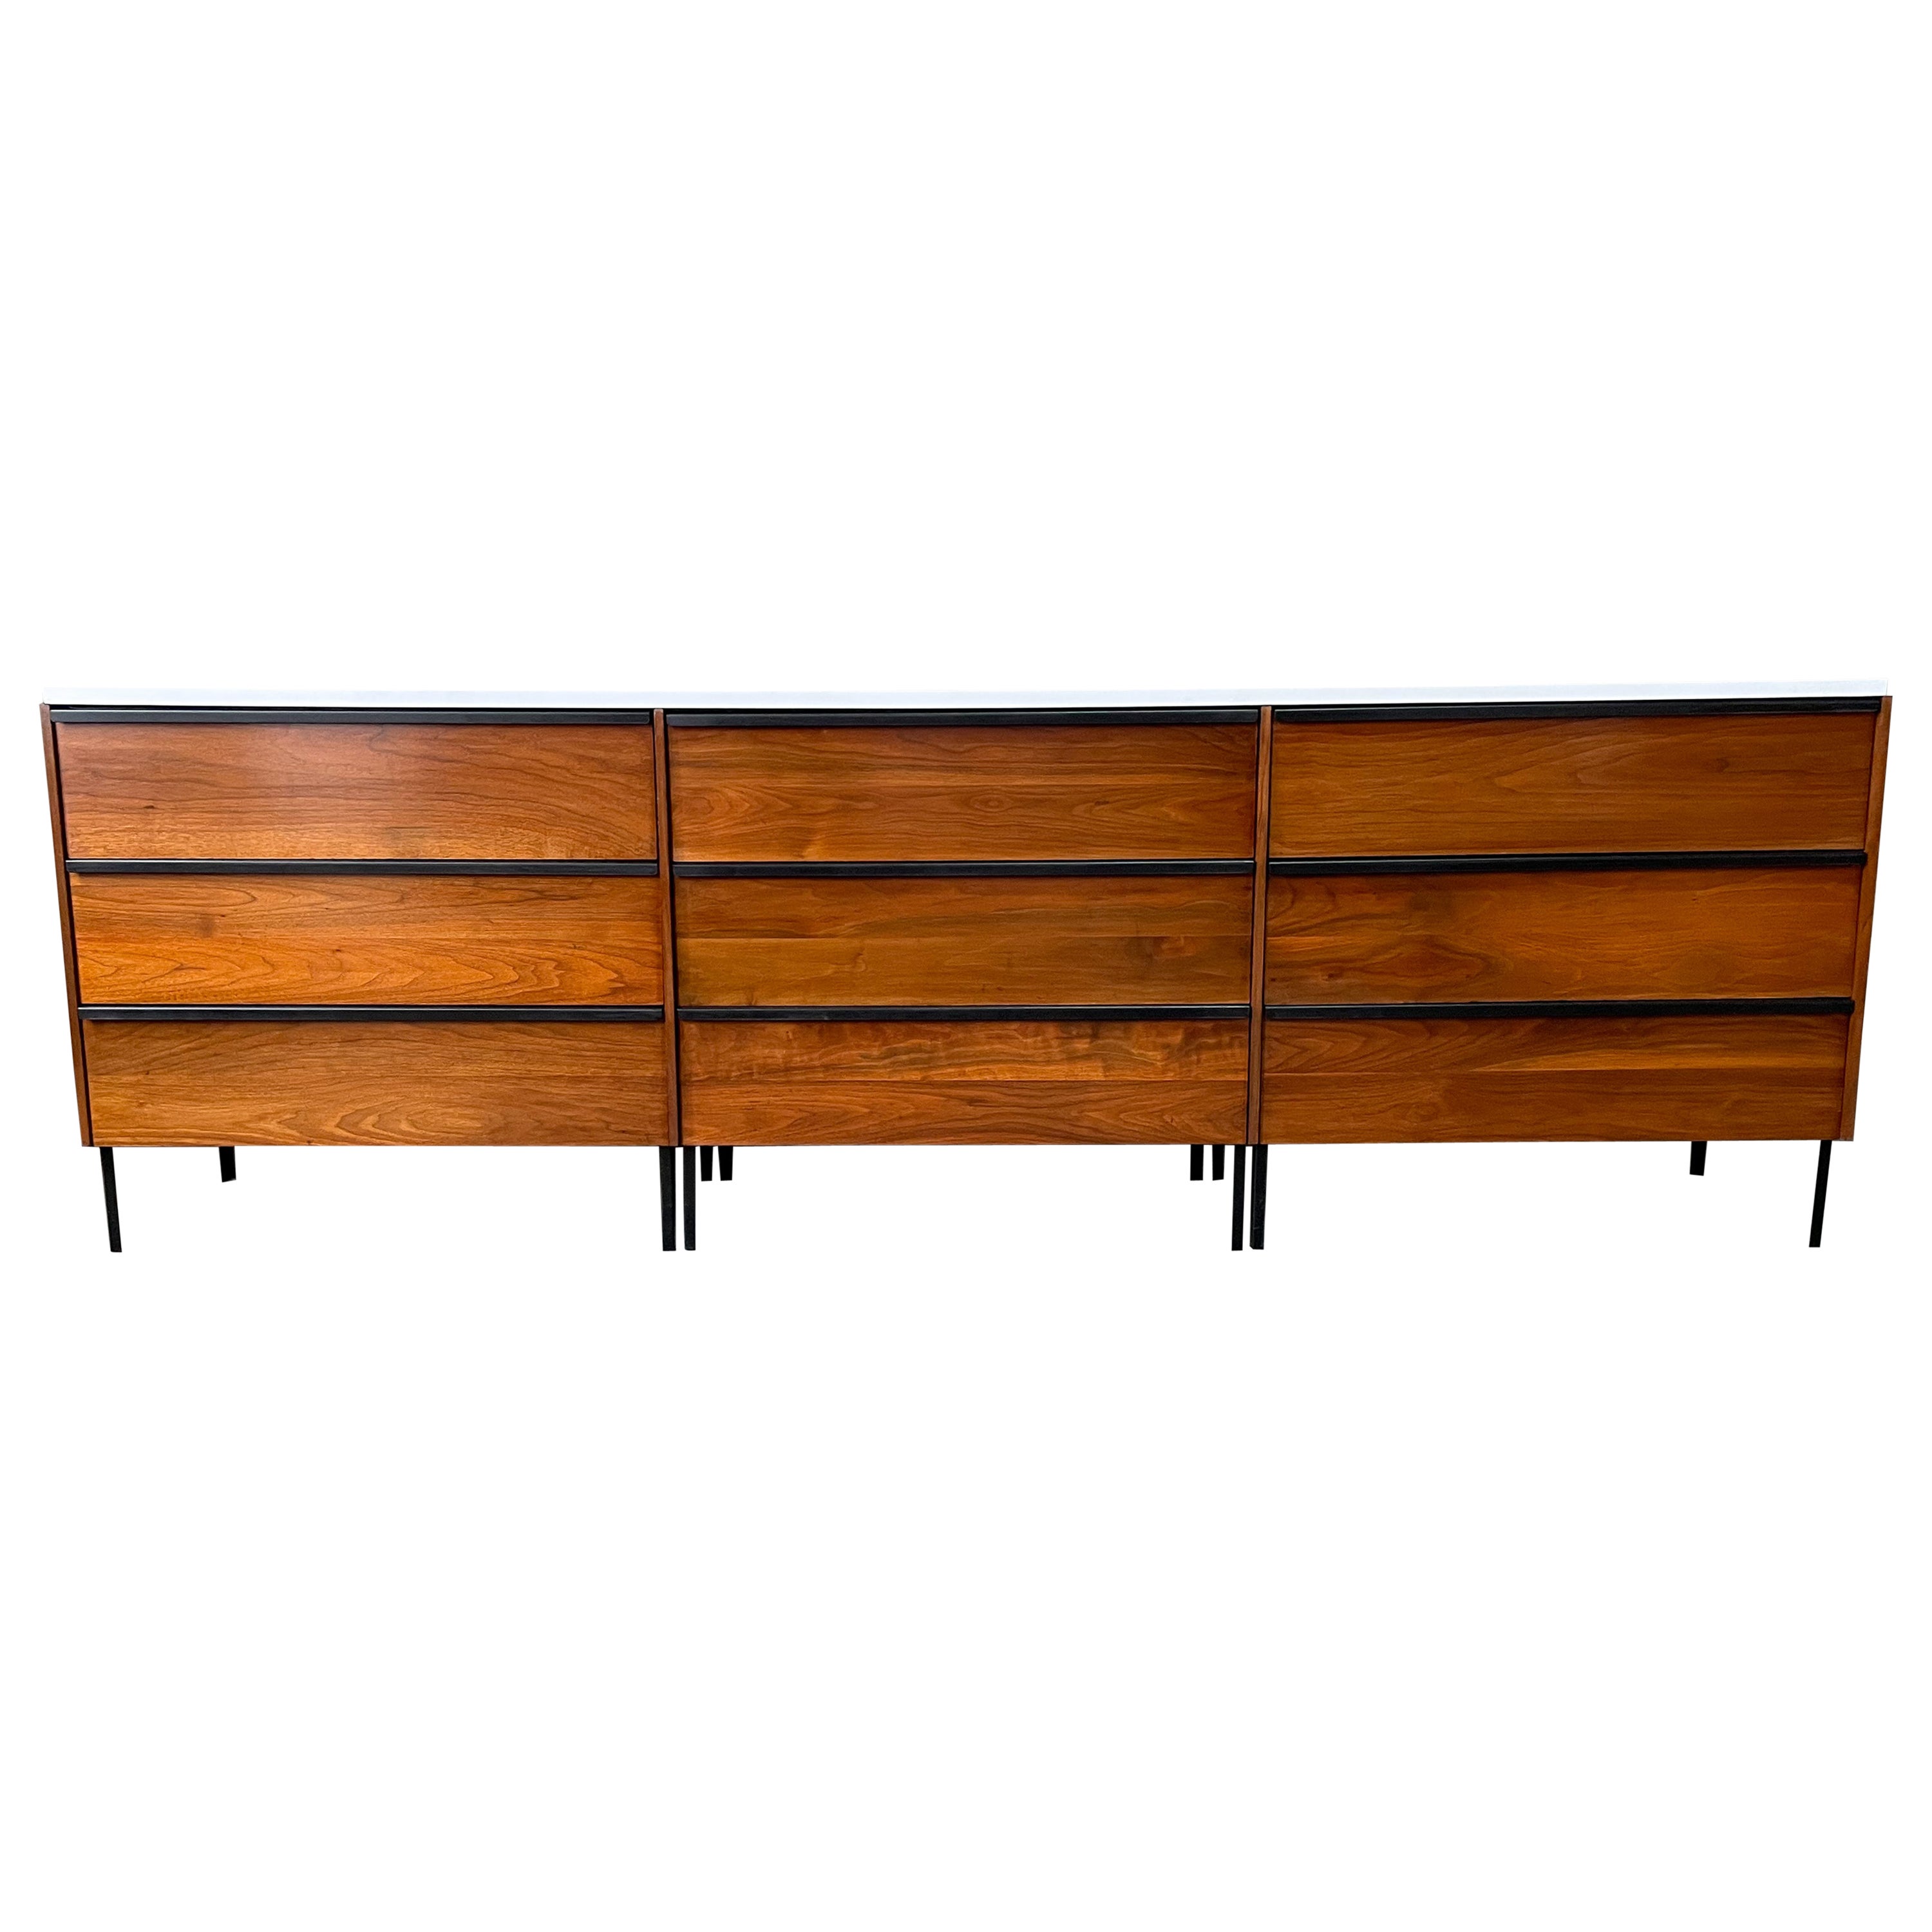 Norman Cherner Chest of Drawers for Multiflex Corp